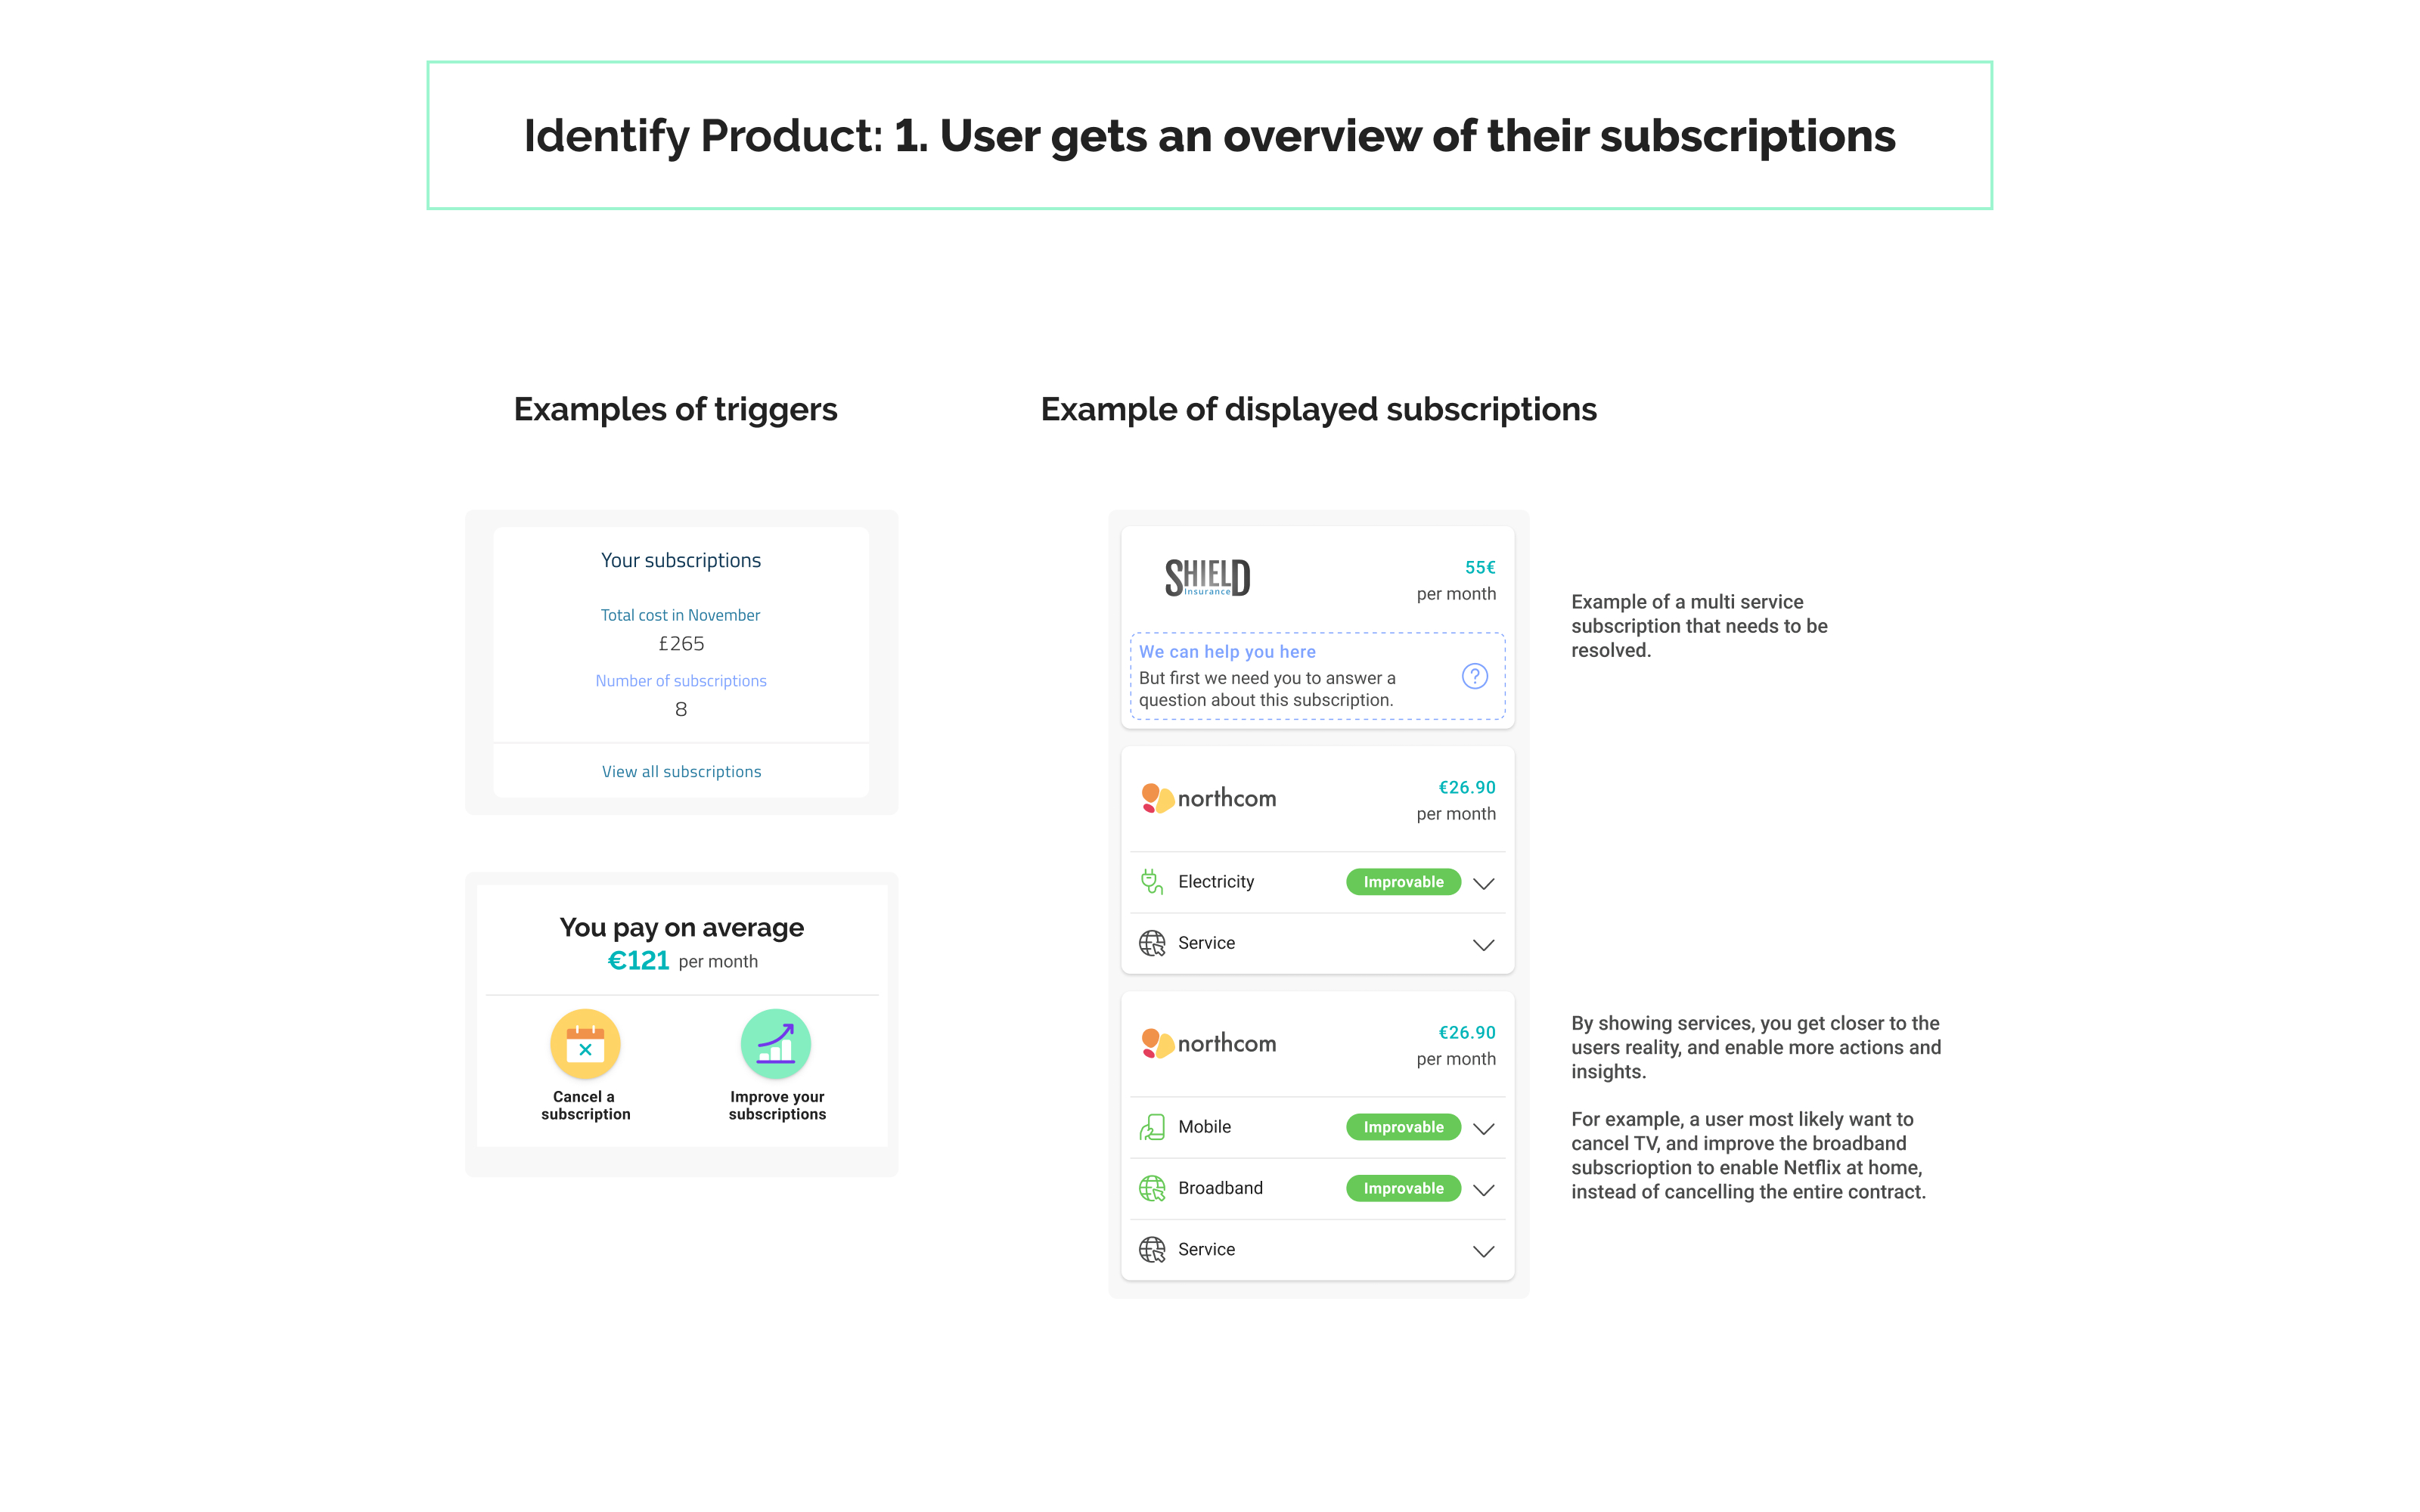 Example of how a user is presented the subscription overview